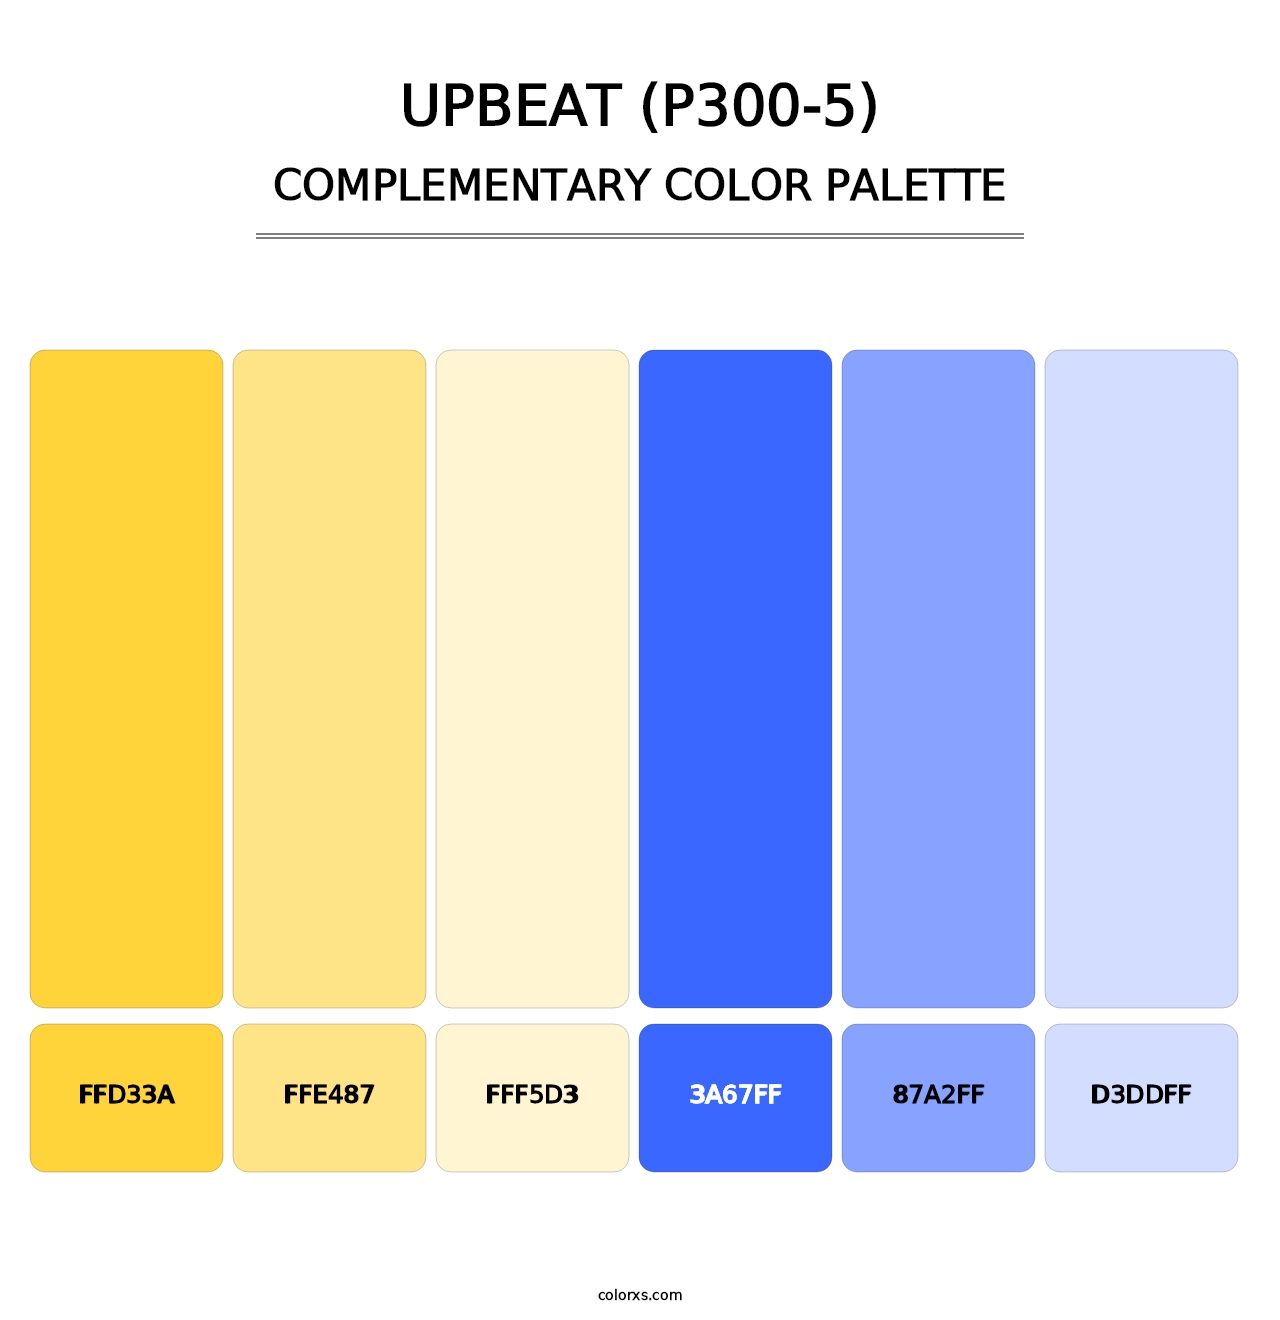 Upbeat (P300-5) - Complementary Color Palette